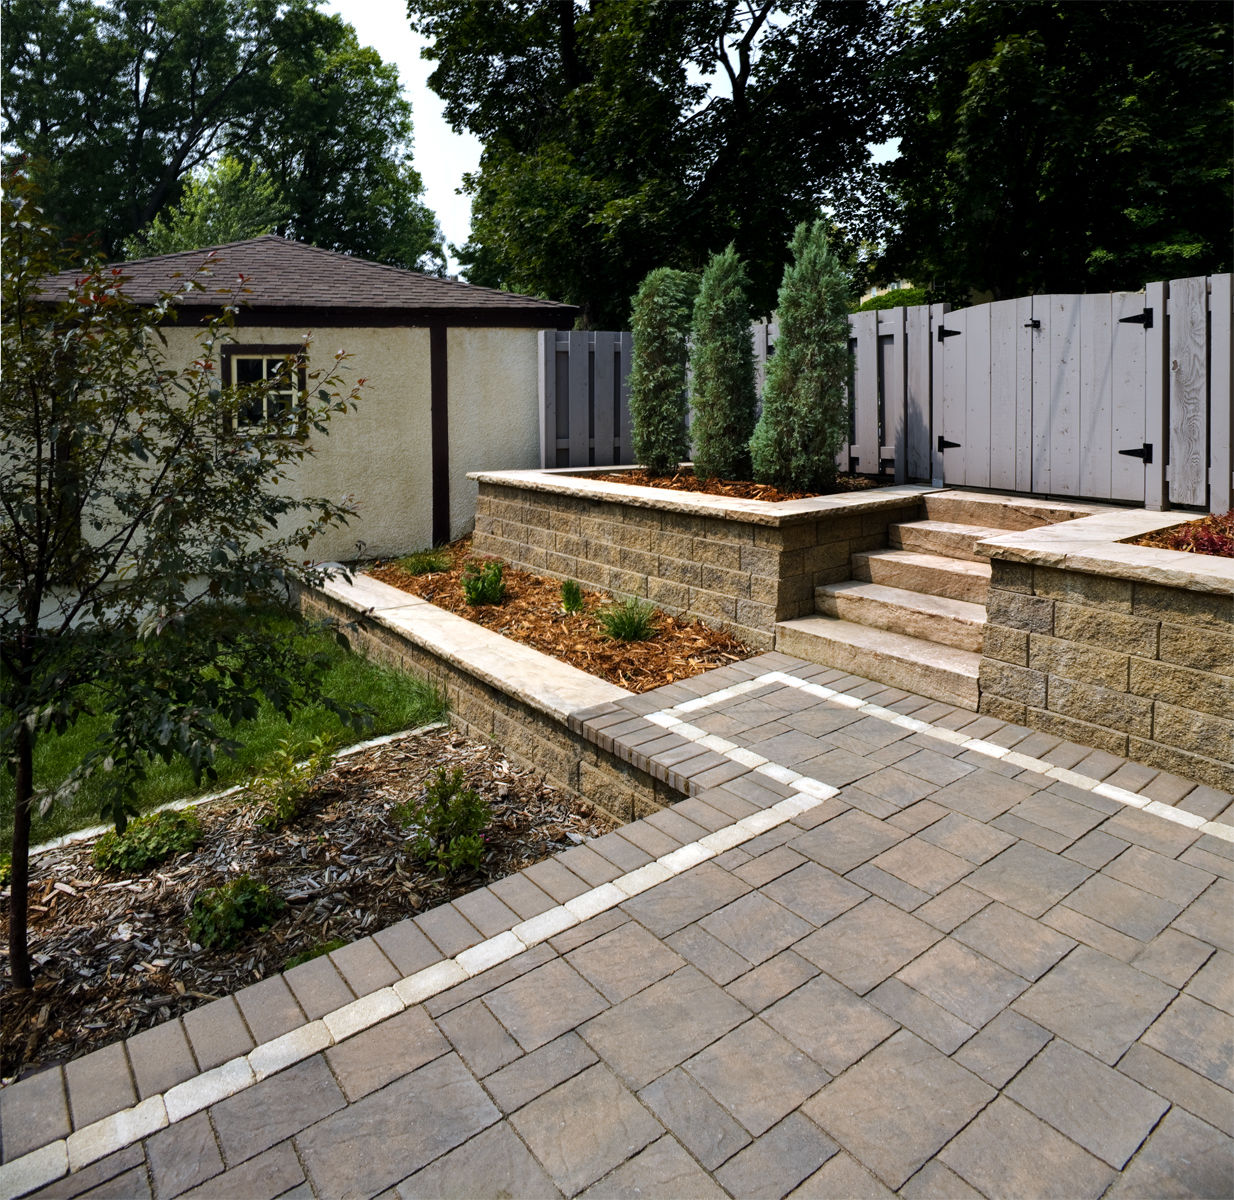 Sit back and relax in your own backyard on a beautiful, maintenance-free paver patio.